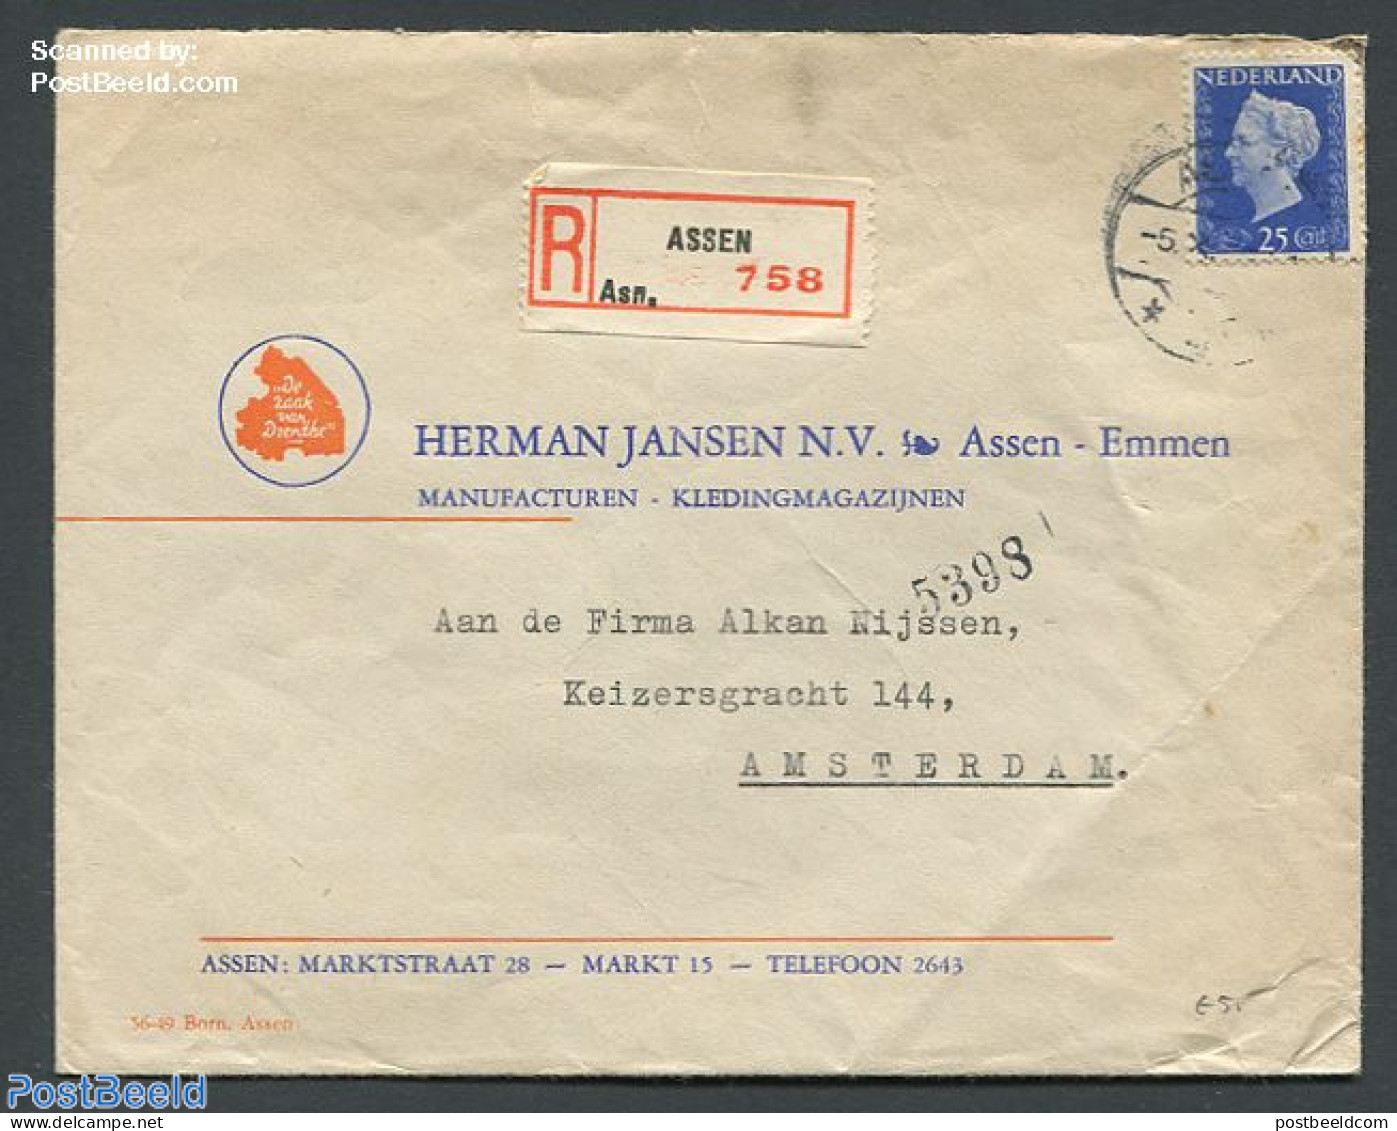 Netherlands 1947 Registered Cover Assen To Amsterdam With Nvhp 483, Postal History, History - Kings & Queens (Royalty) - Briefe U. Dokumente